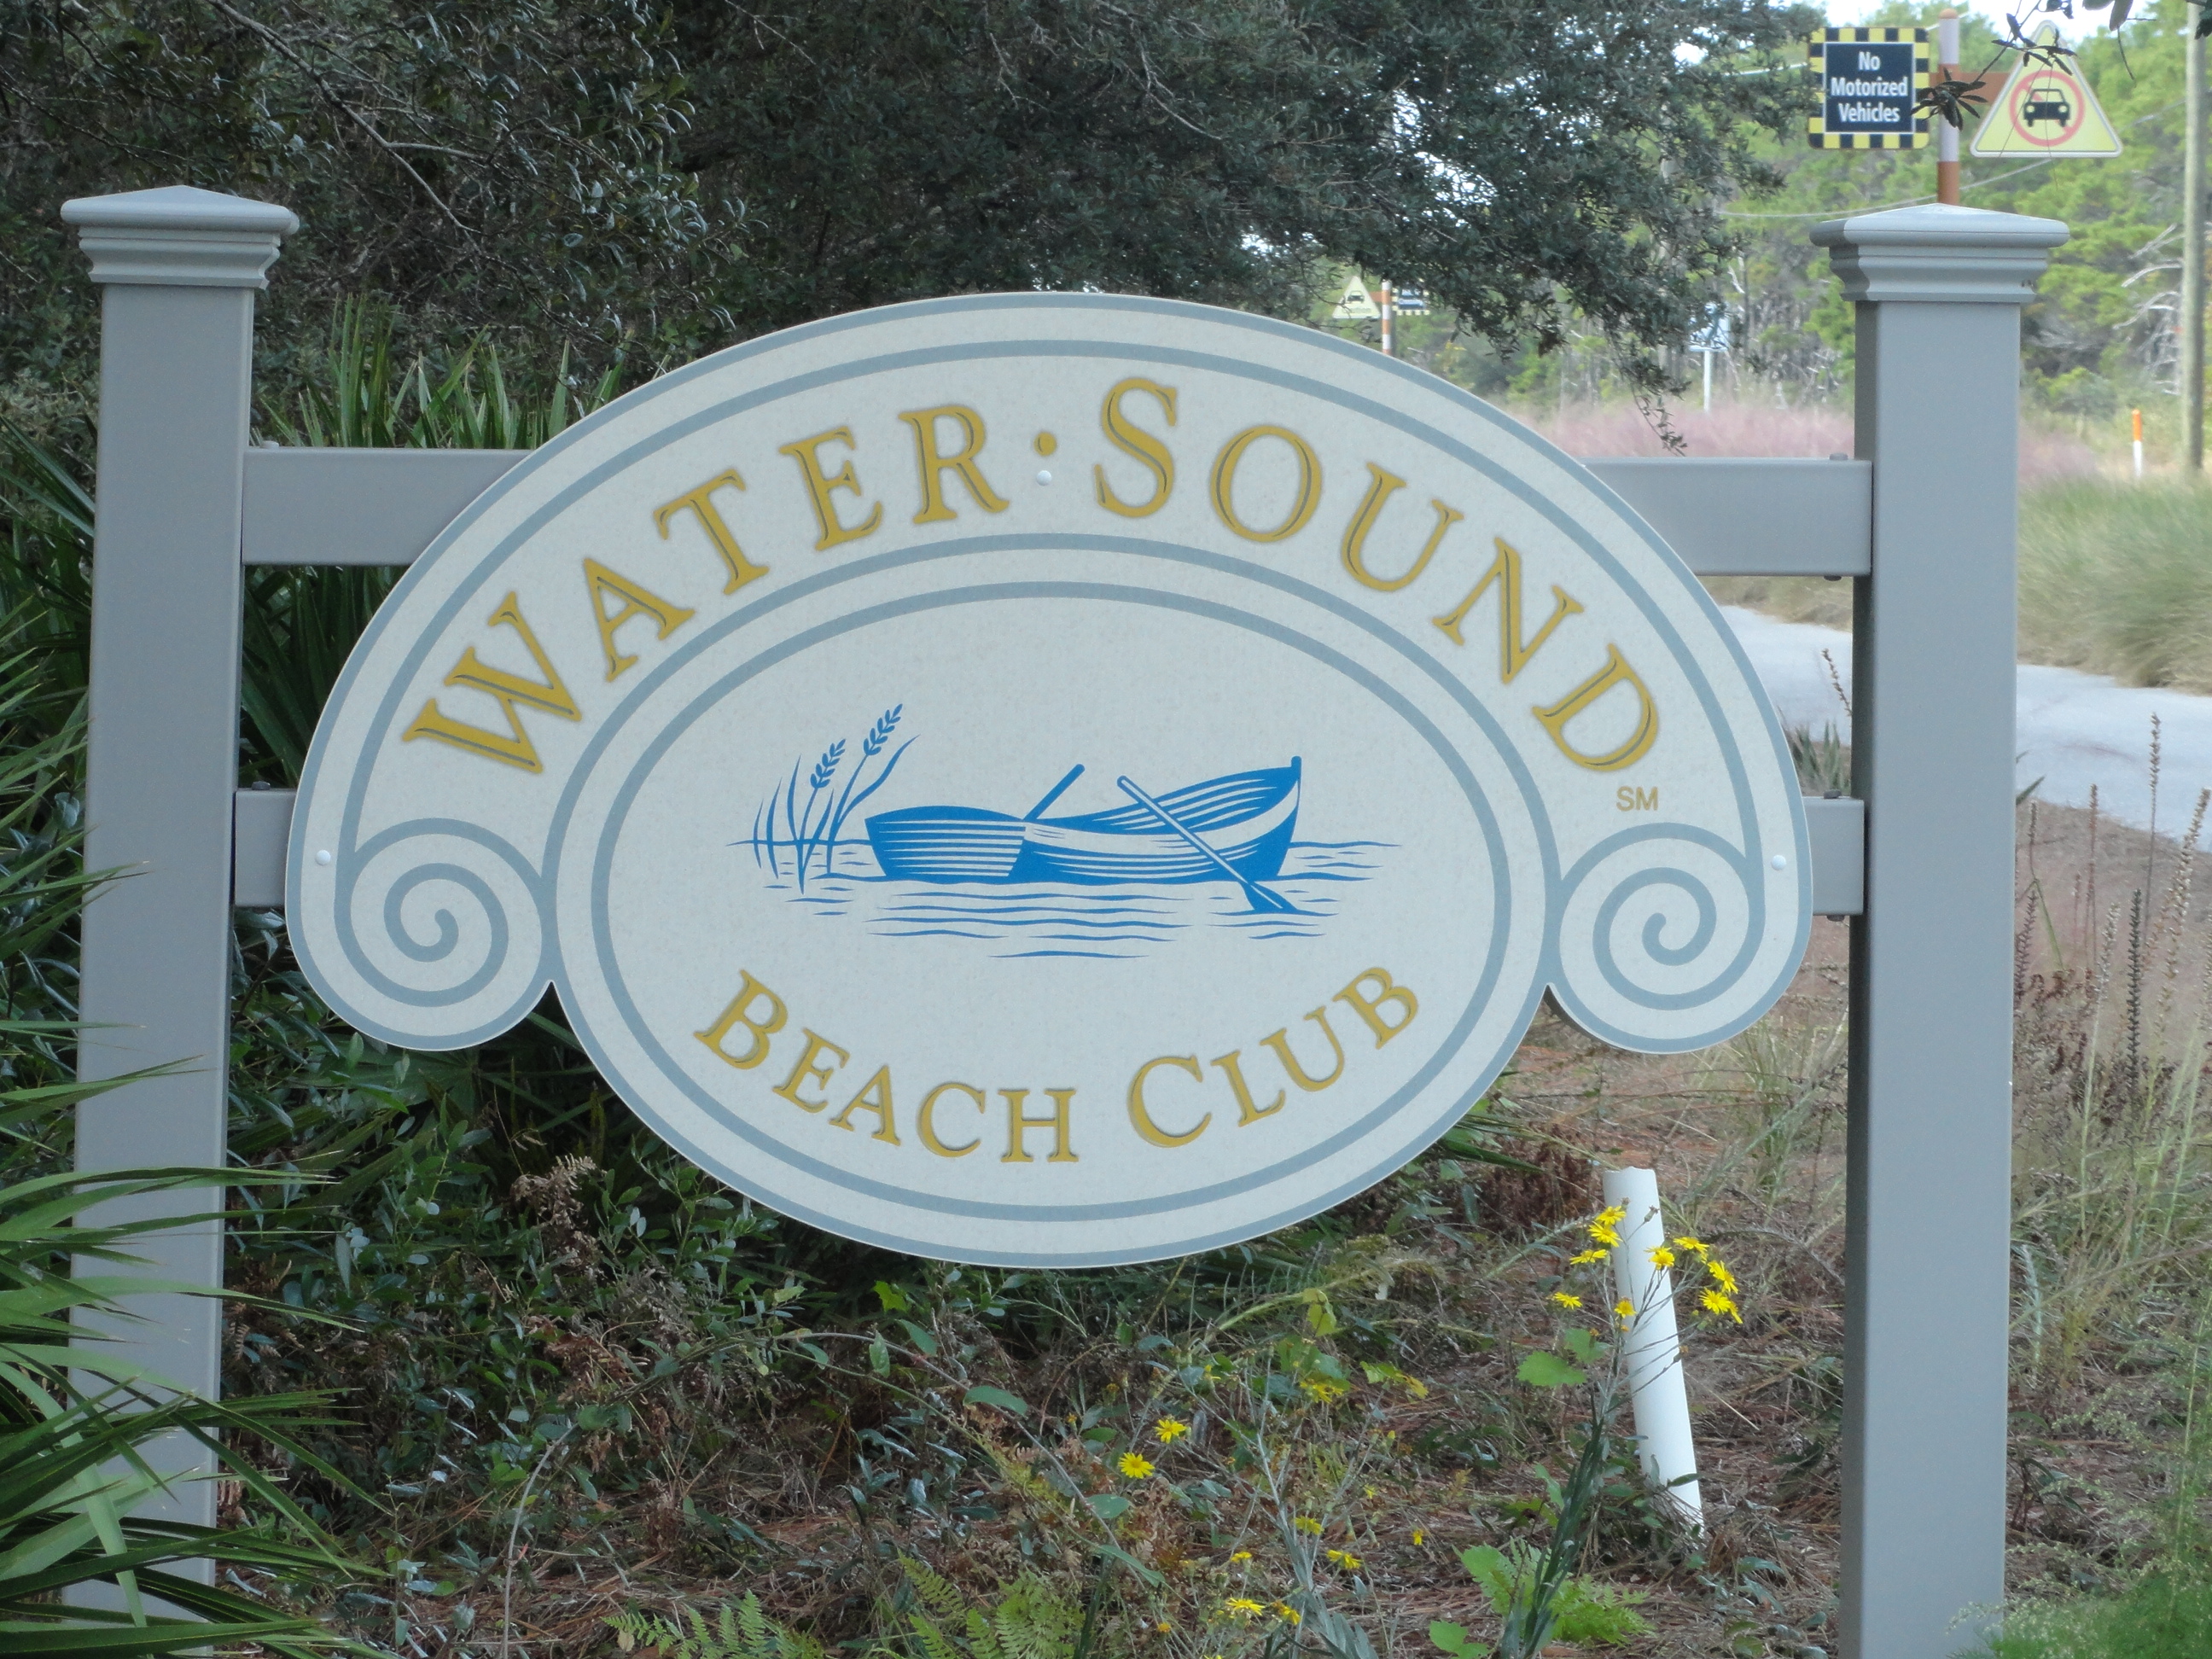 Watersound Beach Club - Homes On 30A ® 850-687-1064